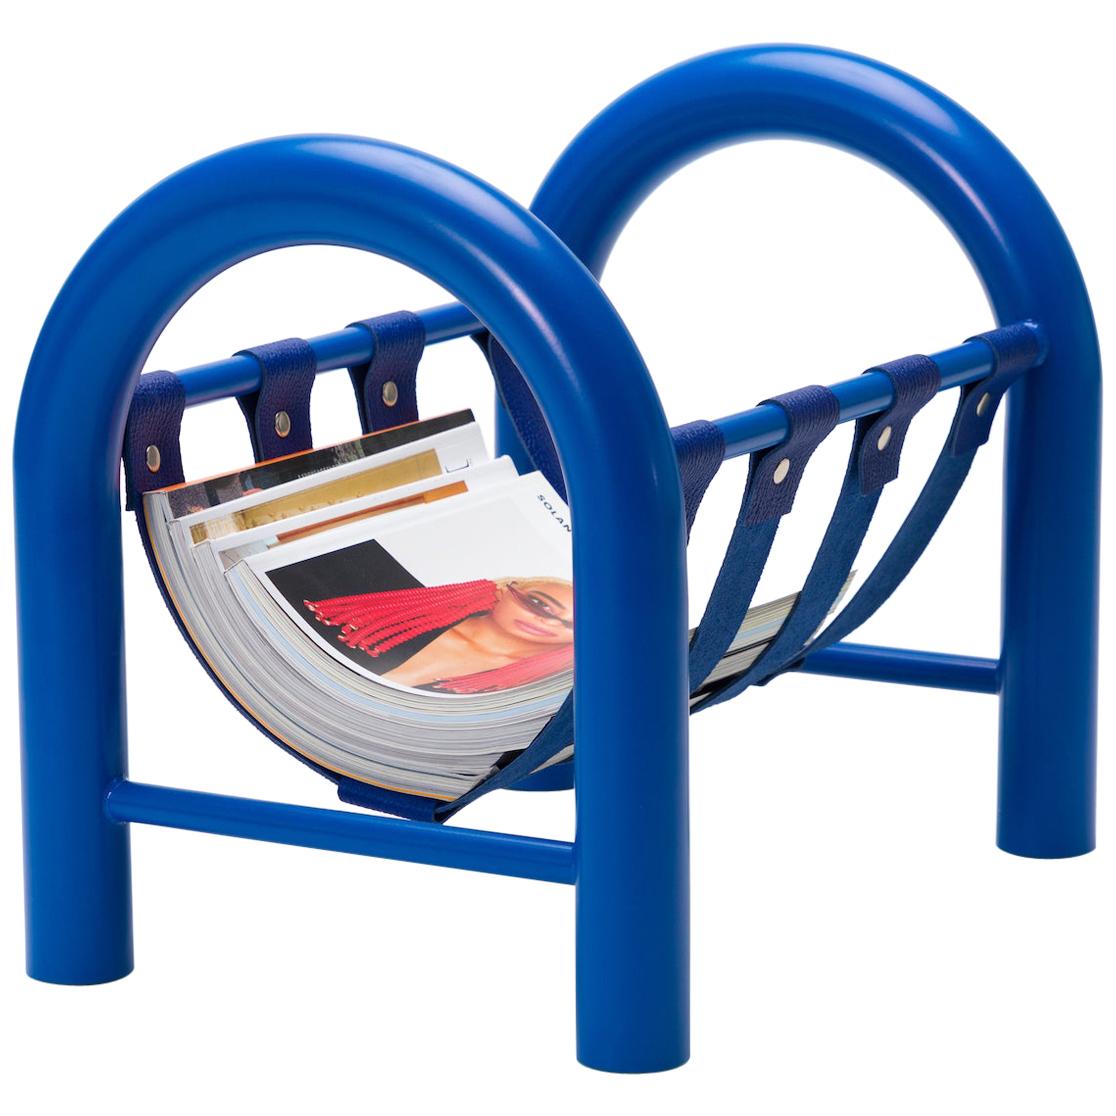 The tubular magazine rack is a lightweight yet durable magazine rack perfect for holding any reading materials you want at the ready, while injecting a sense of thoughtful design into a space.

This limited edition blue frame with blue leather